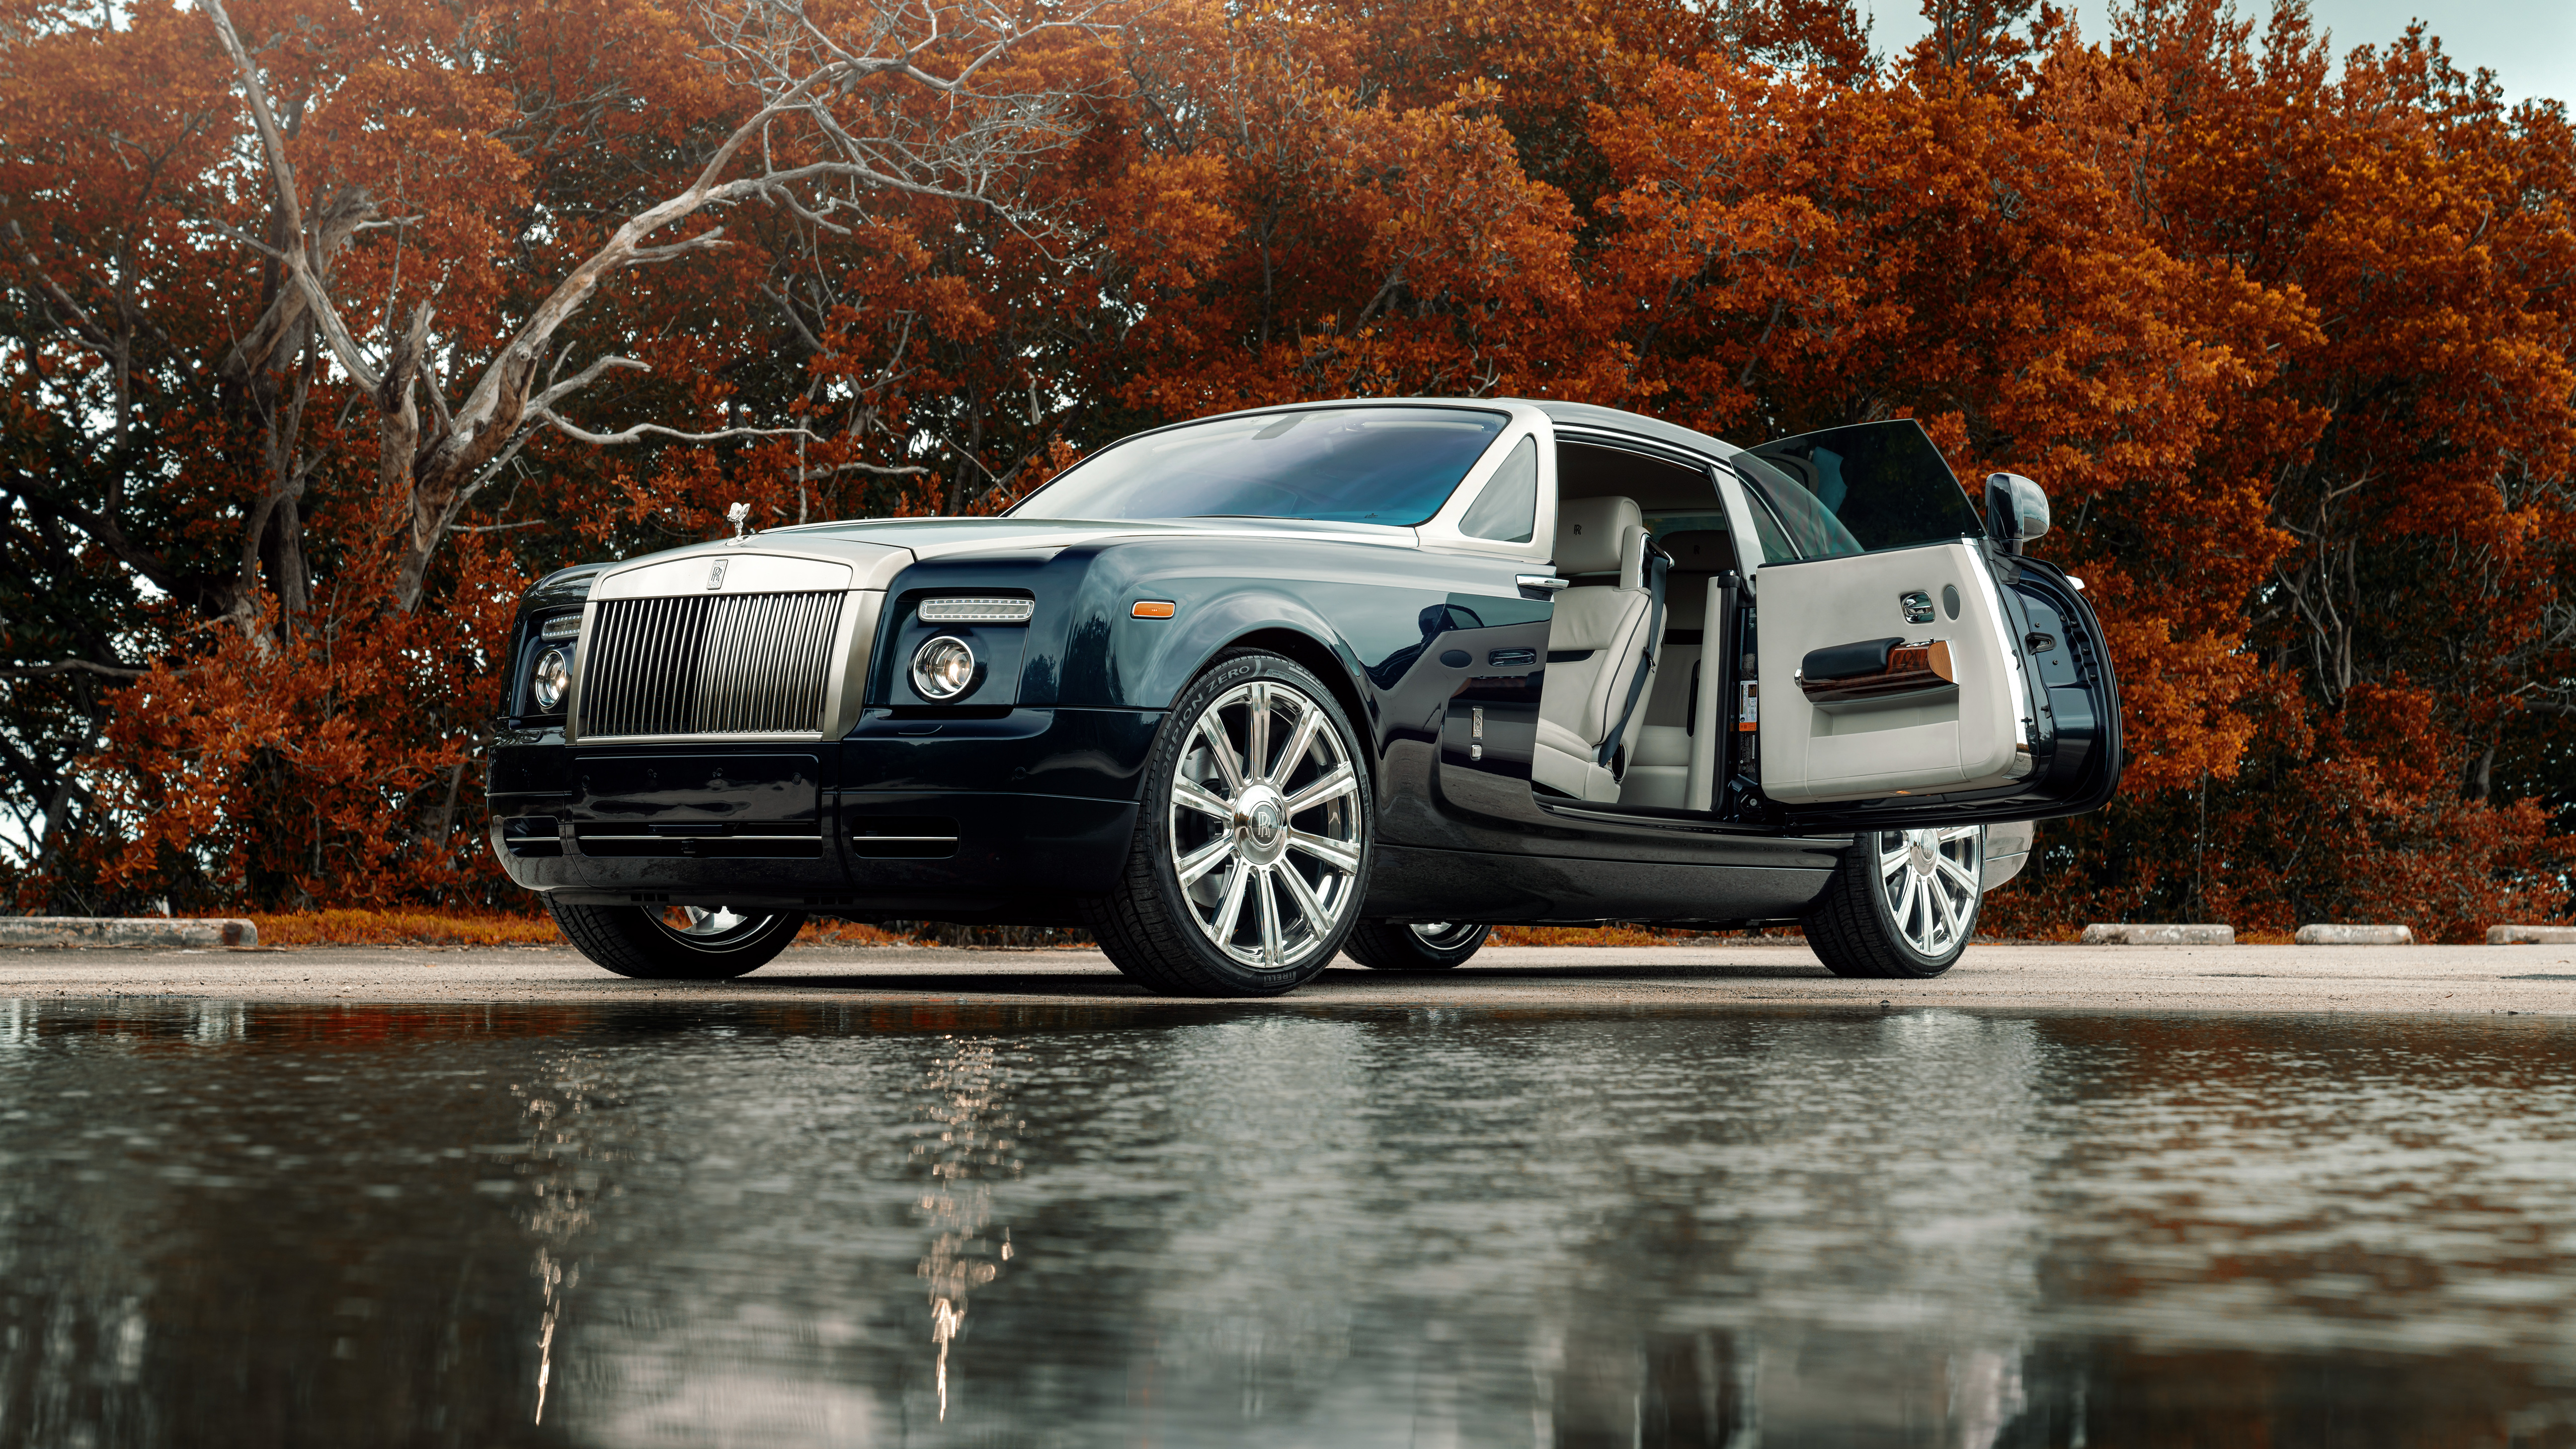 Car Rolls Royce Luxury Cars British Cars Frontal View Vehicle Trees Water Reflection 5120x2880